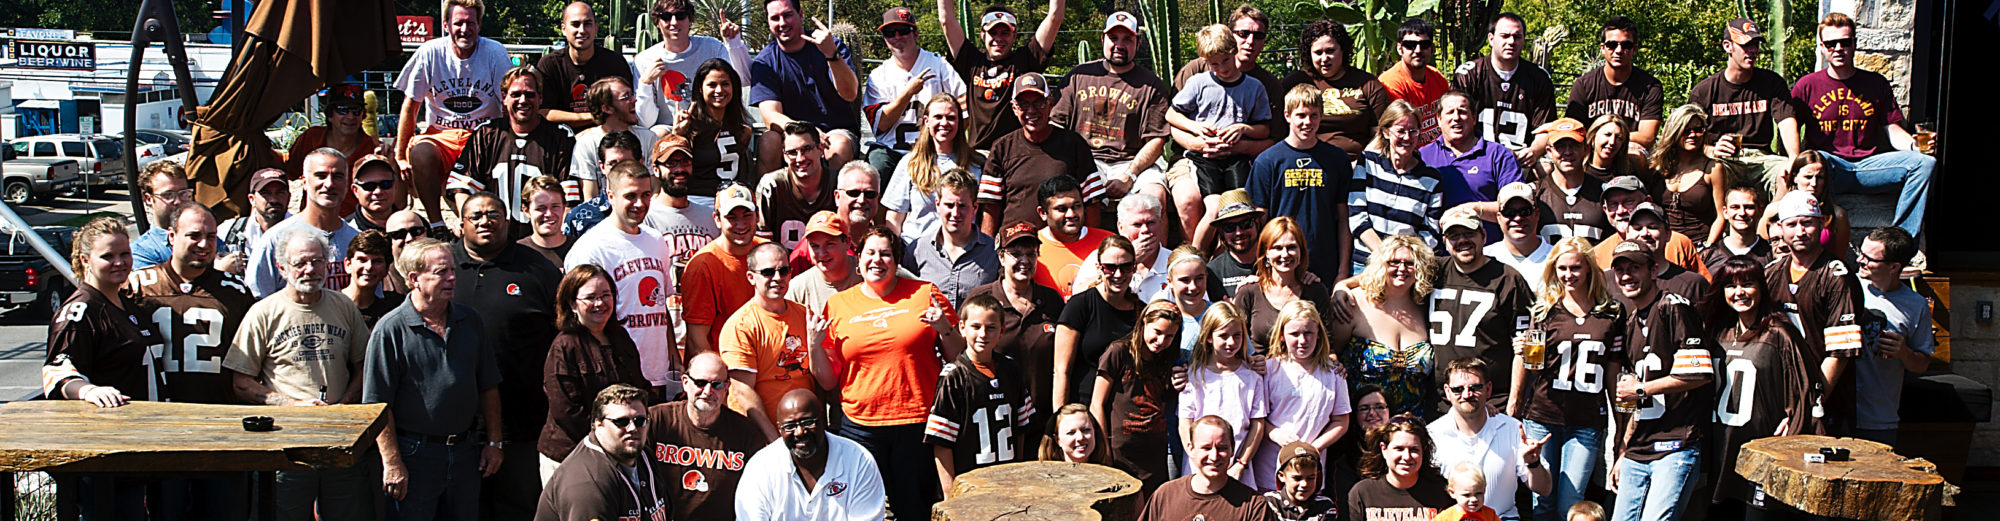 Texas Capital Area Browns Backers